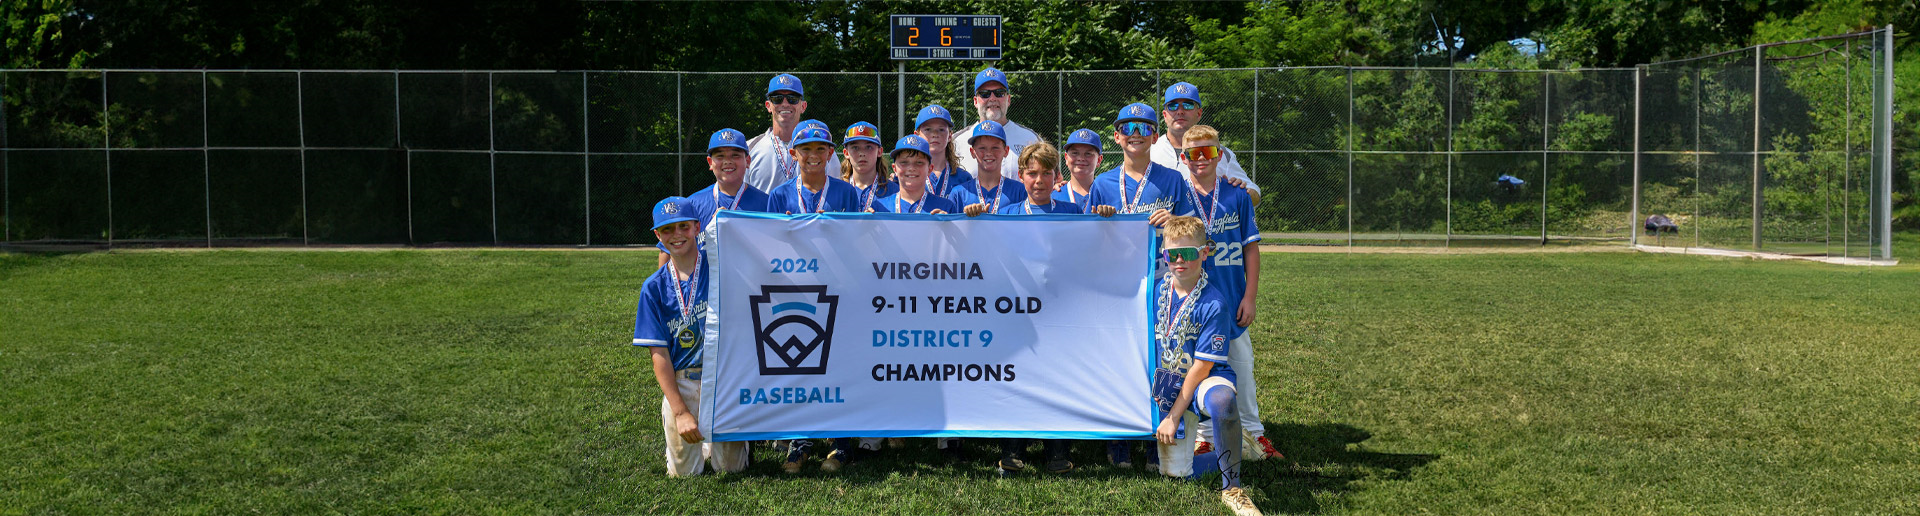 WSLL 9-11 All-Stars Win District